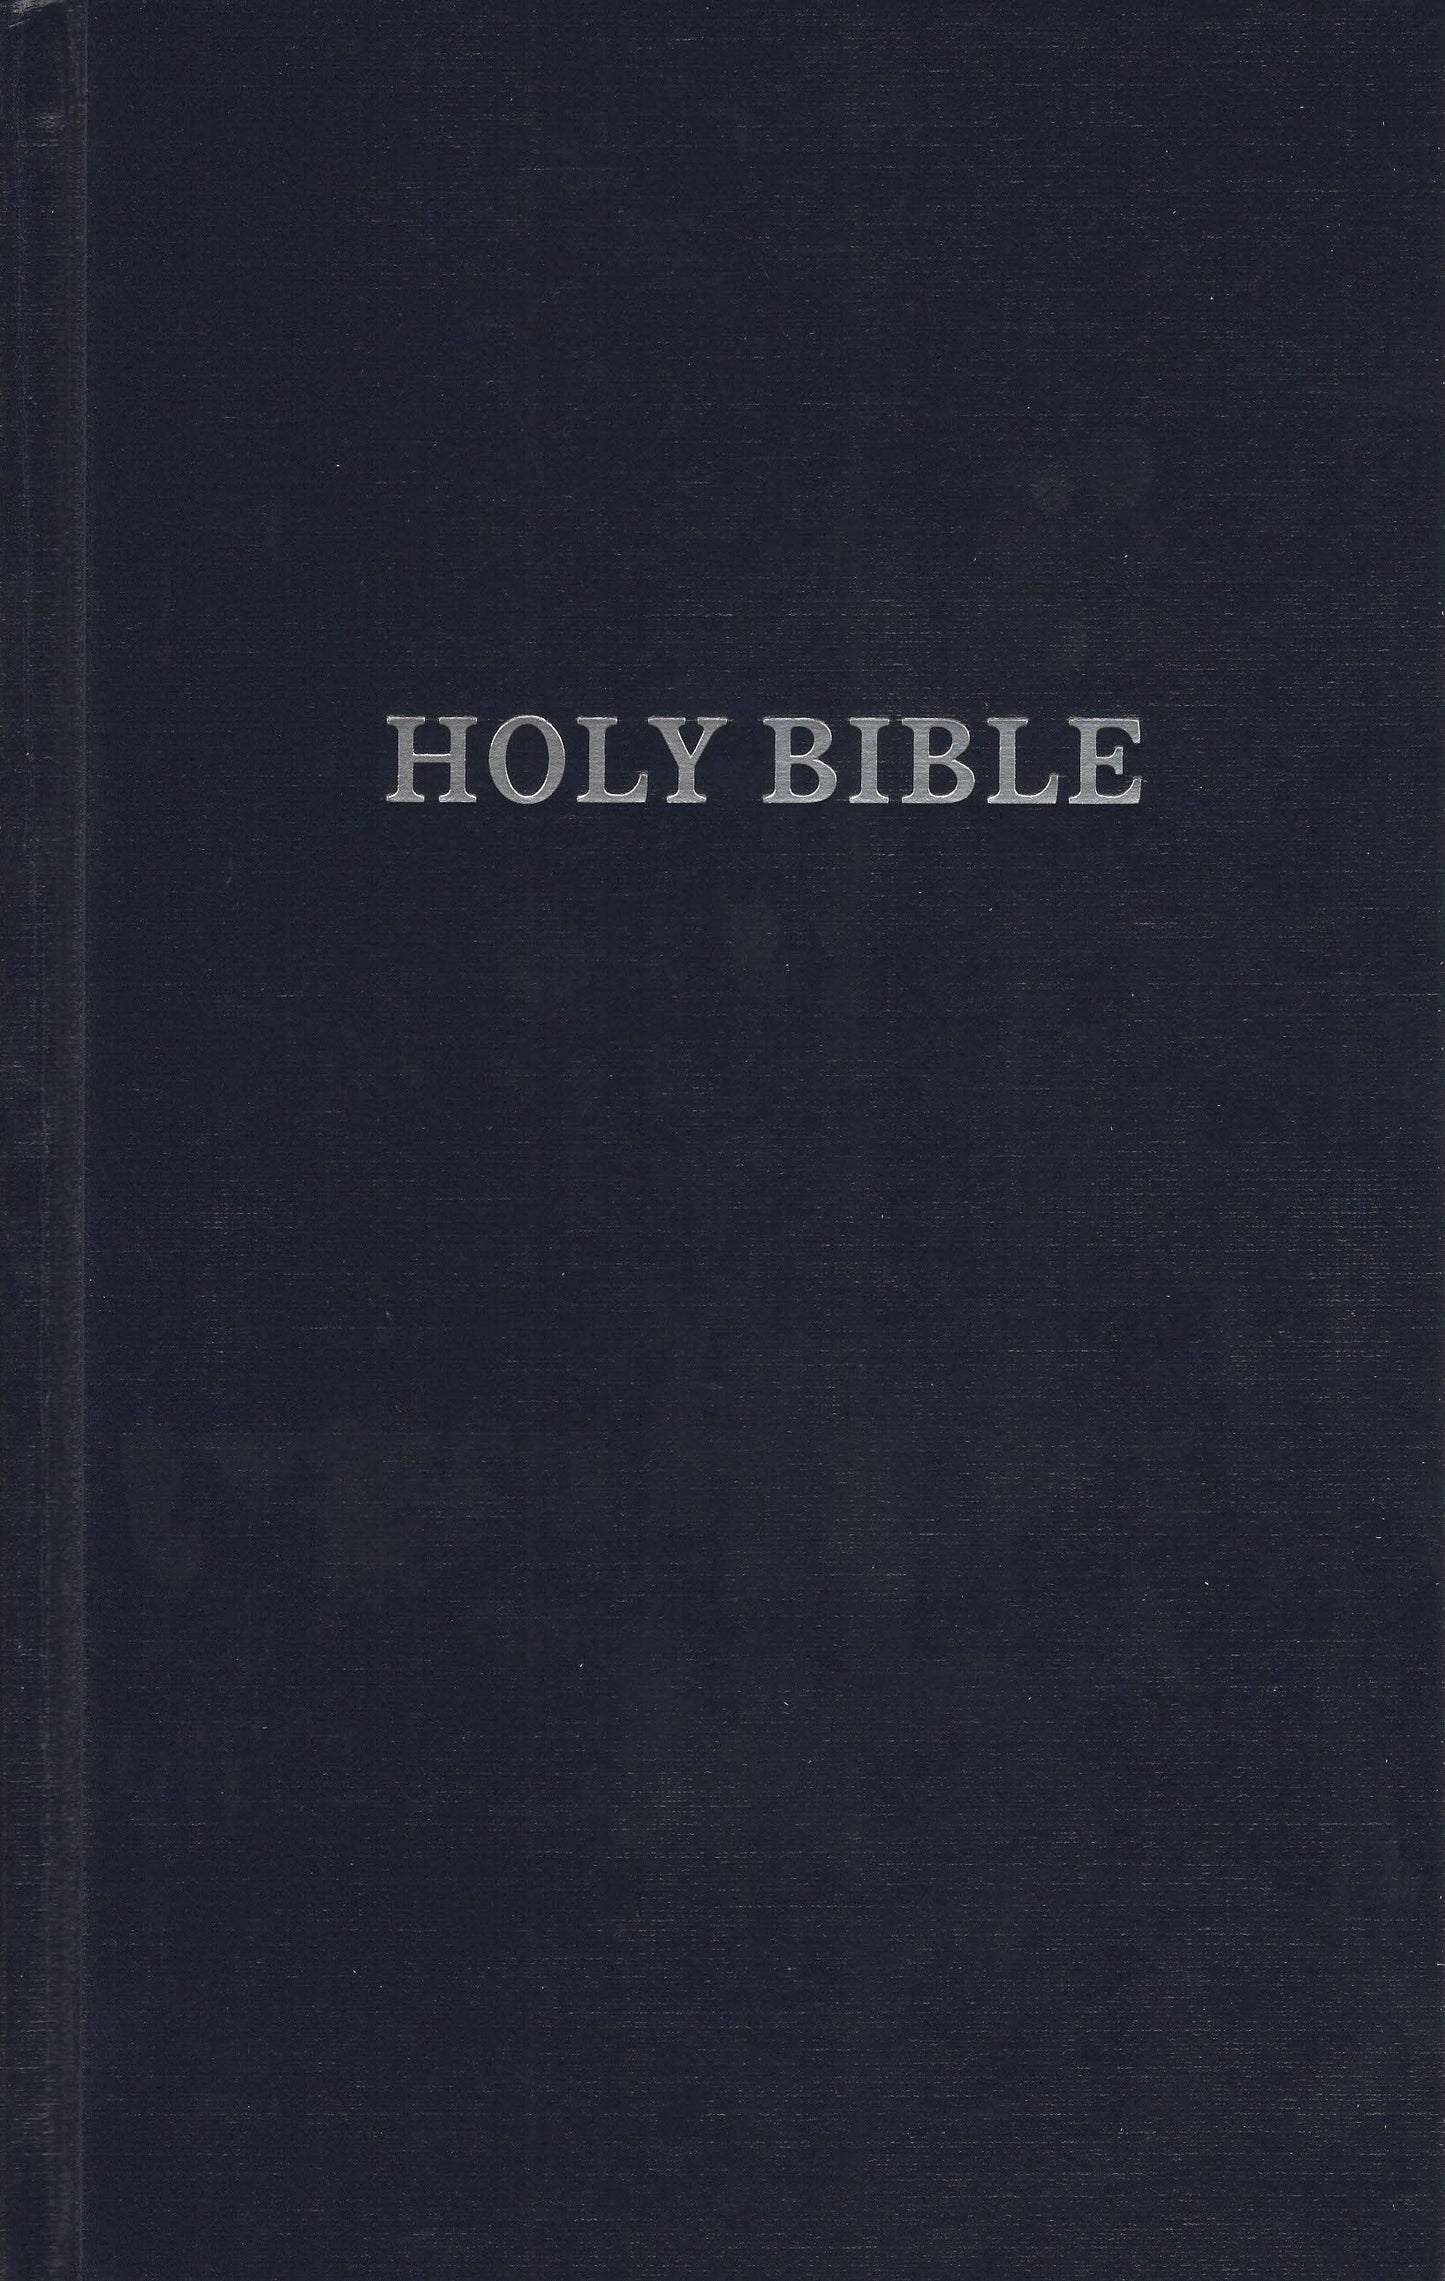 Thomas Nelson KJV Pew Bible - Large Print Edition in Comfort Print® - Hardcover w/Dust Jacket